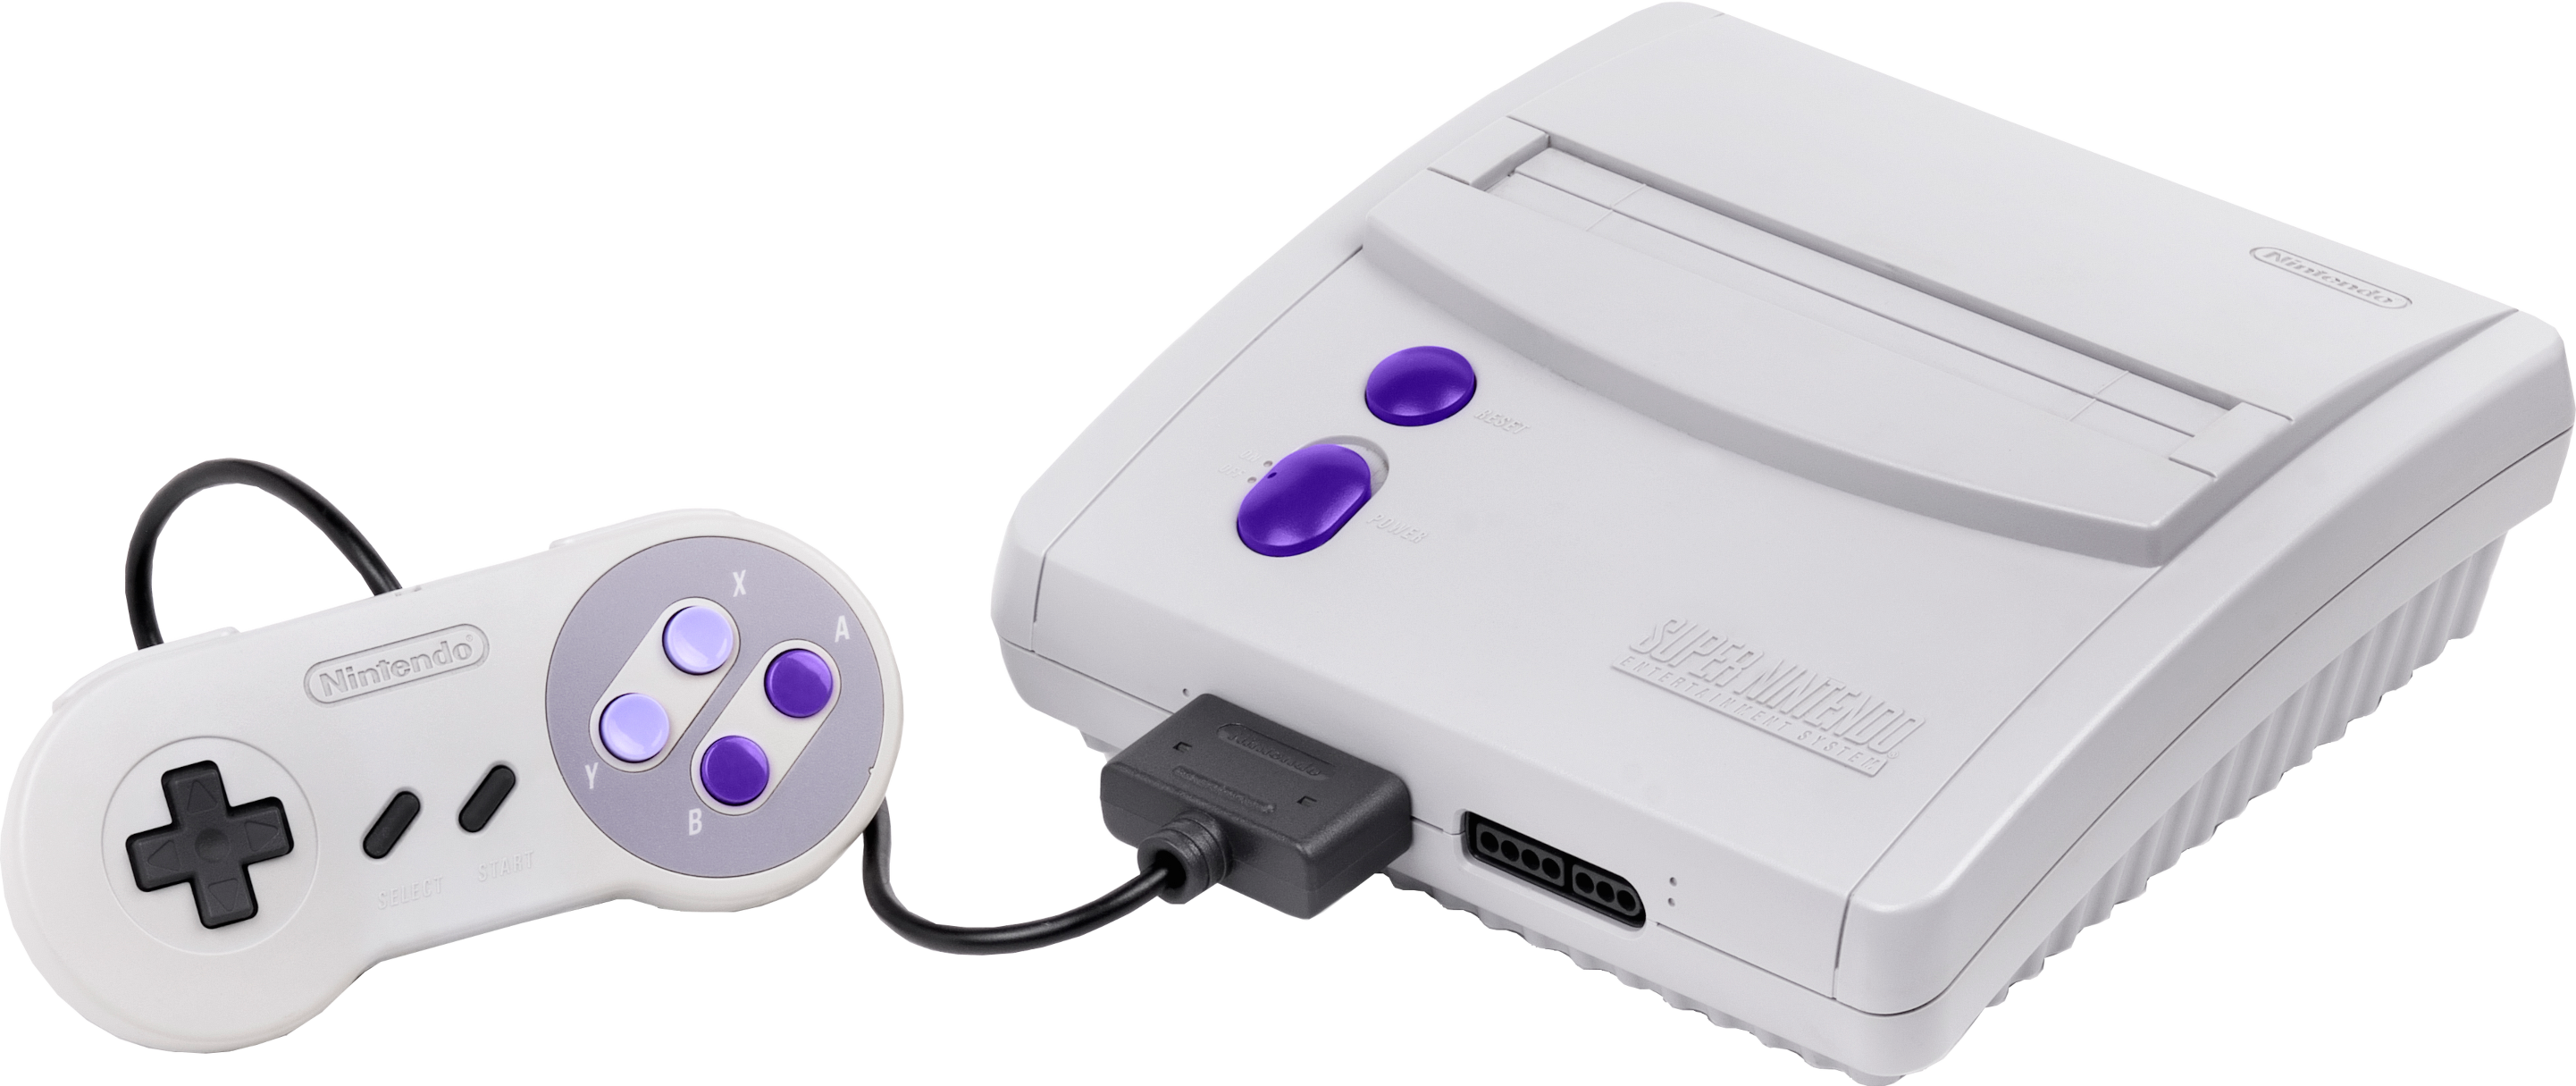 More classic Game Boy, SNES, and NES games added for Nintendo